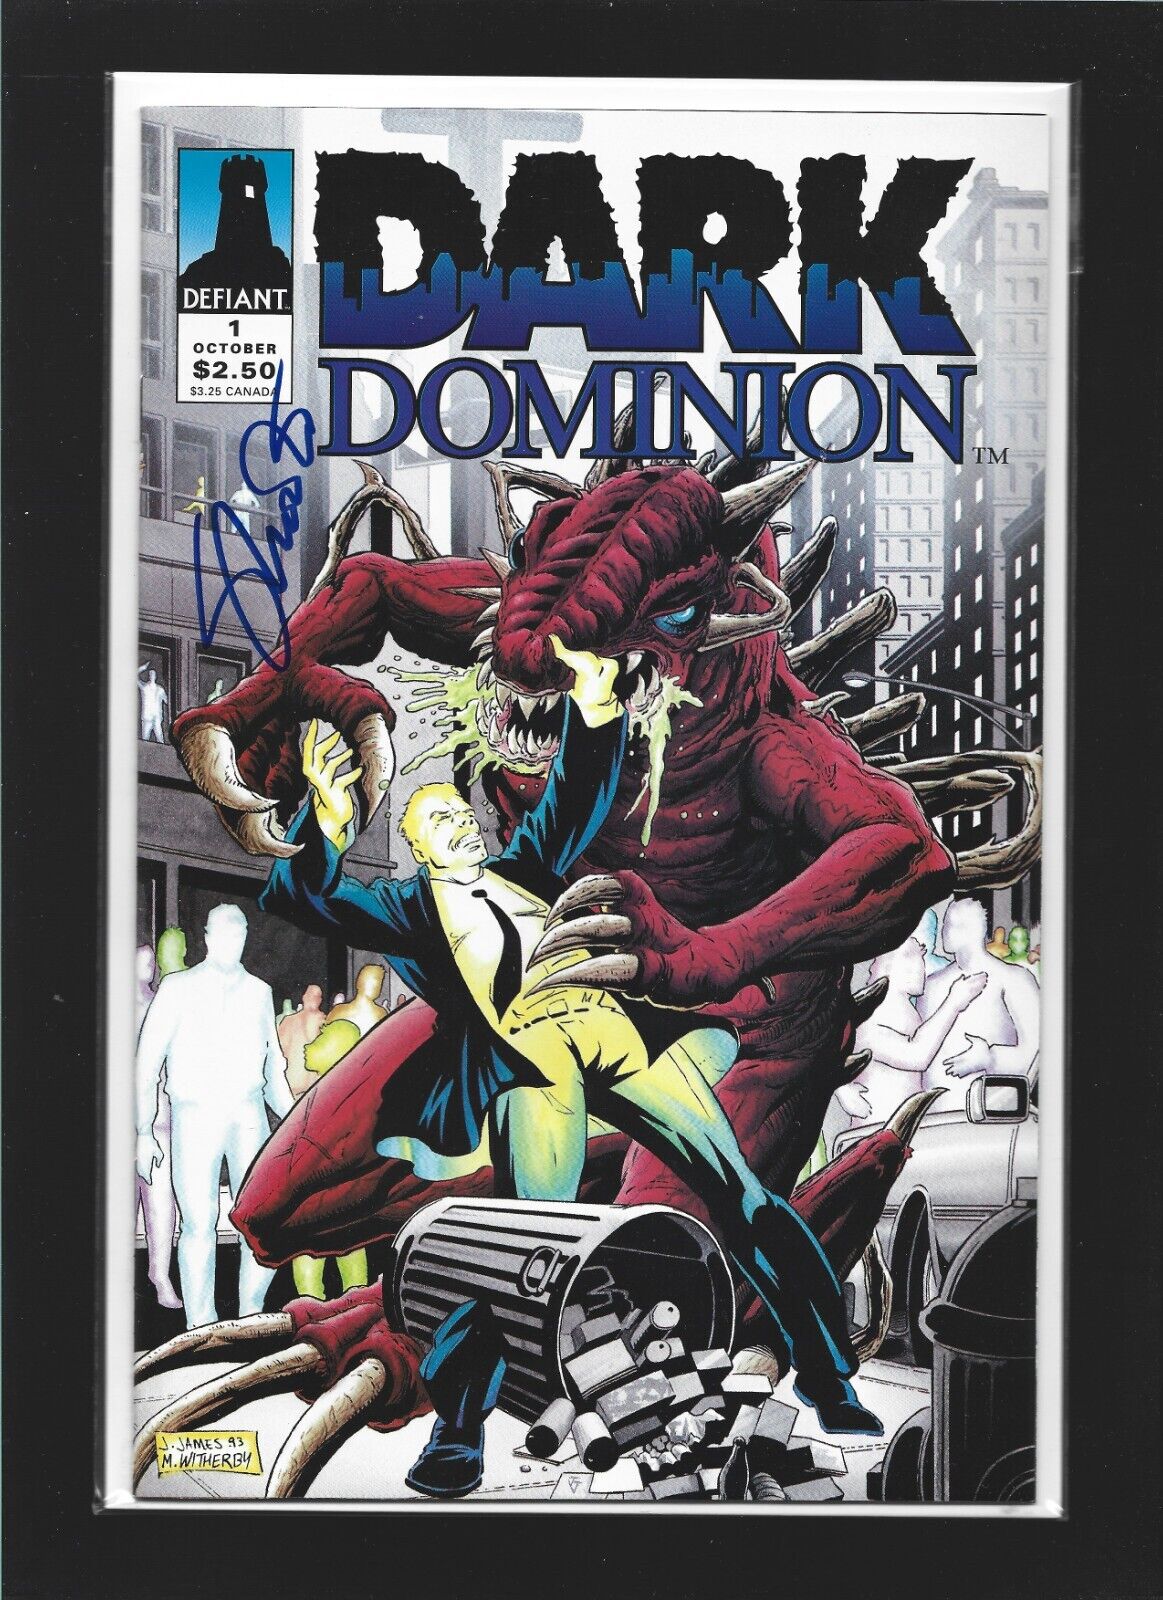 Dark Dominion #1 signed by Jim Shooter / Defiant Comics